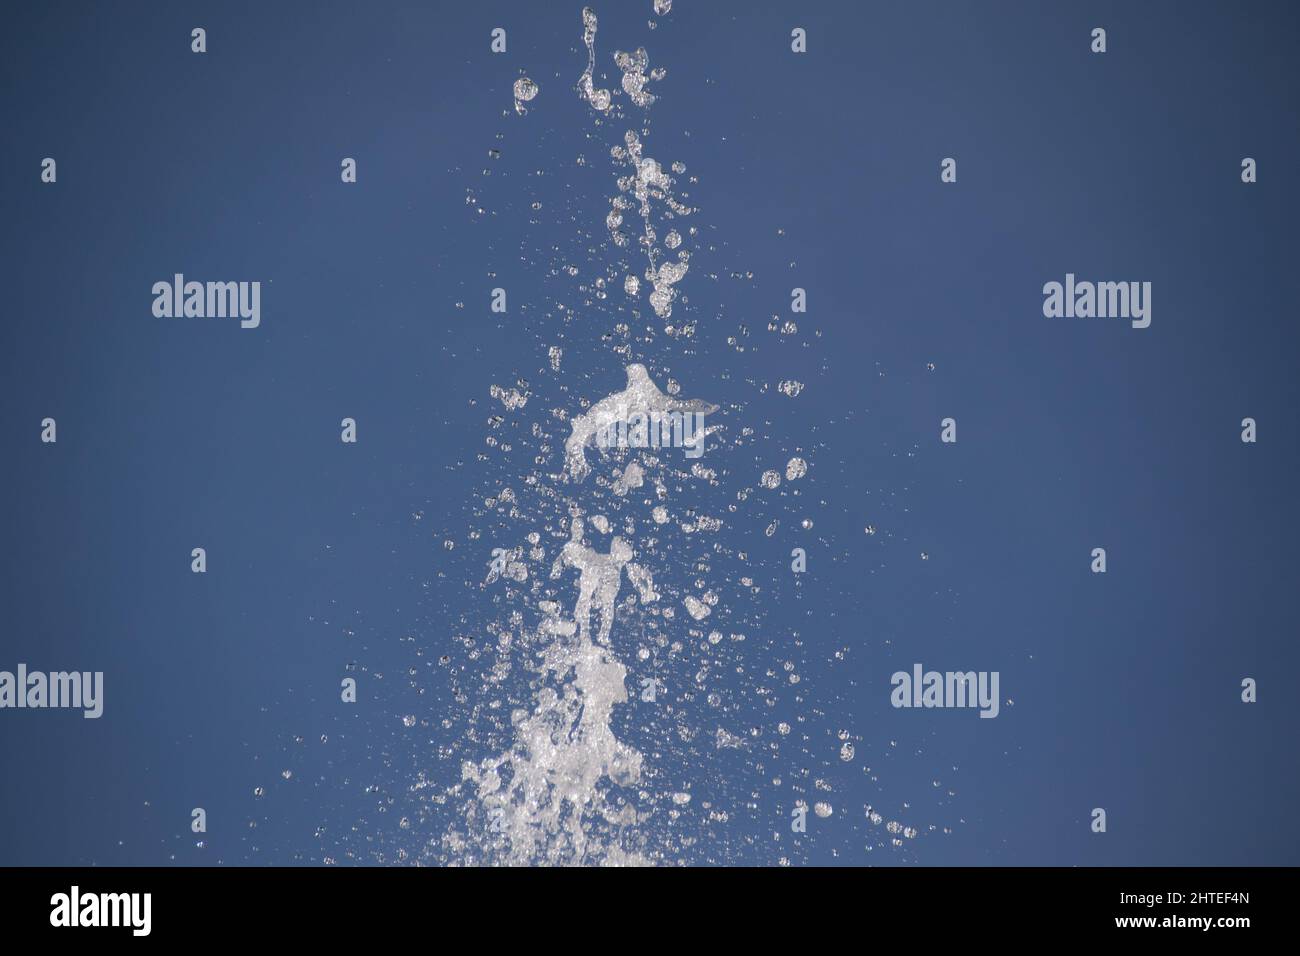 water splash in a blue sky background Stock Photo